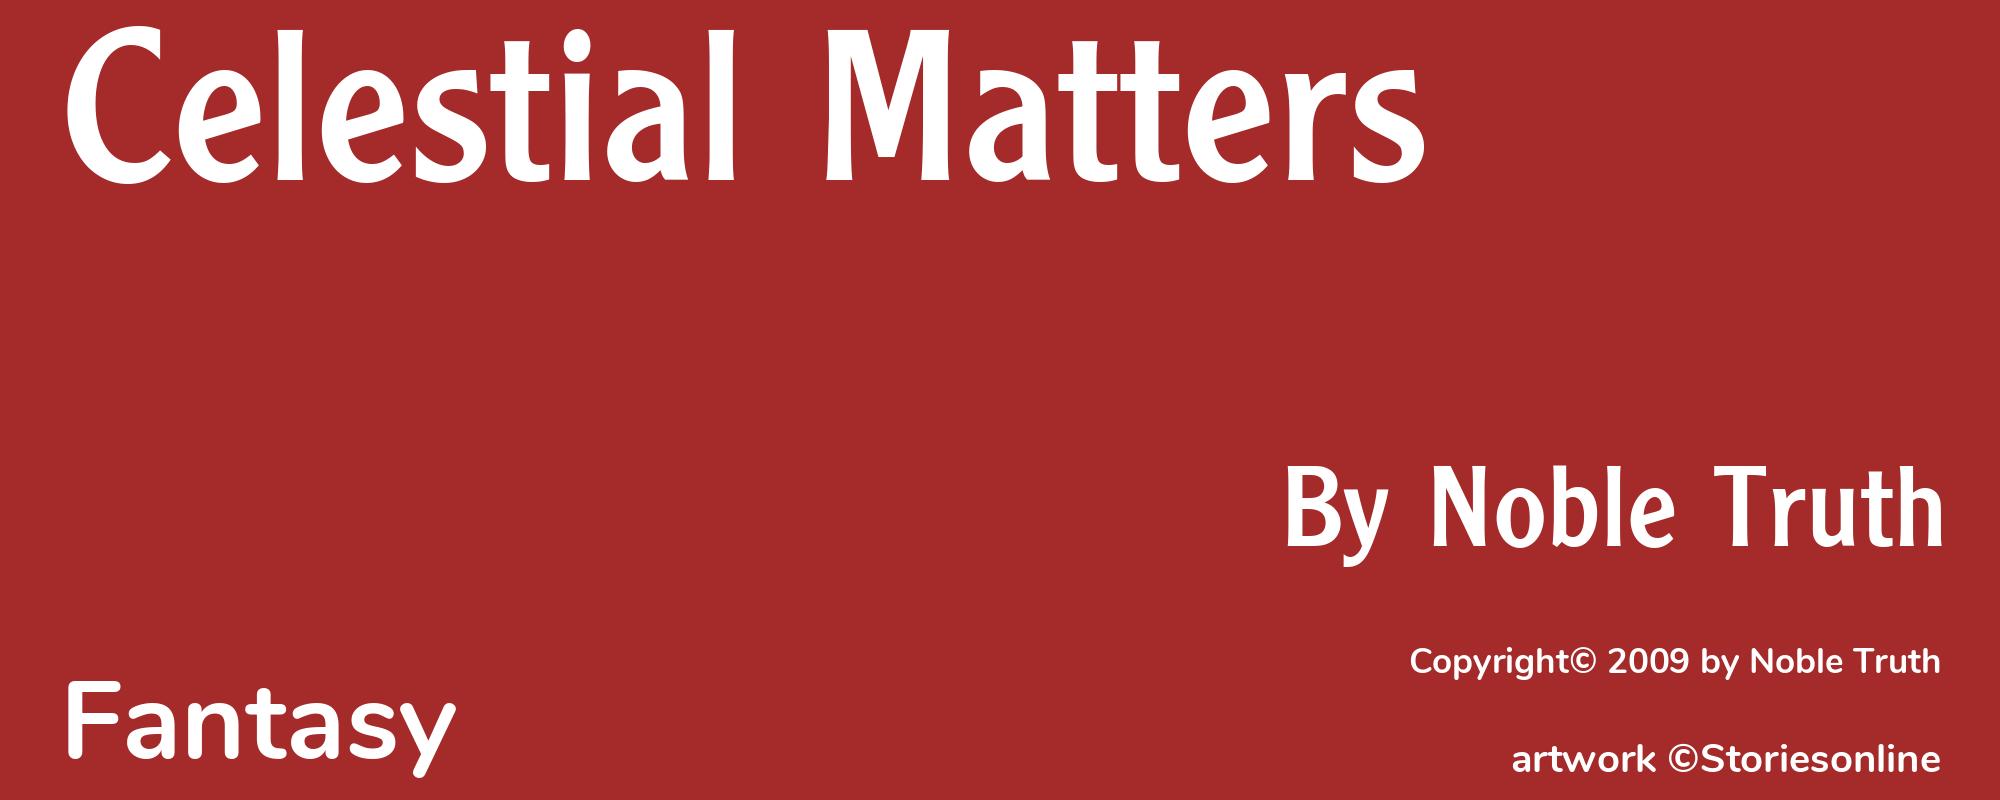 Celestial Matters - Cover